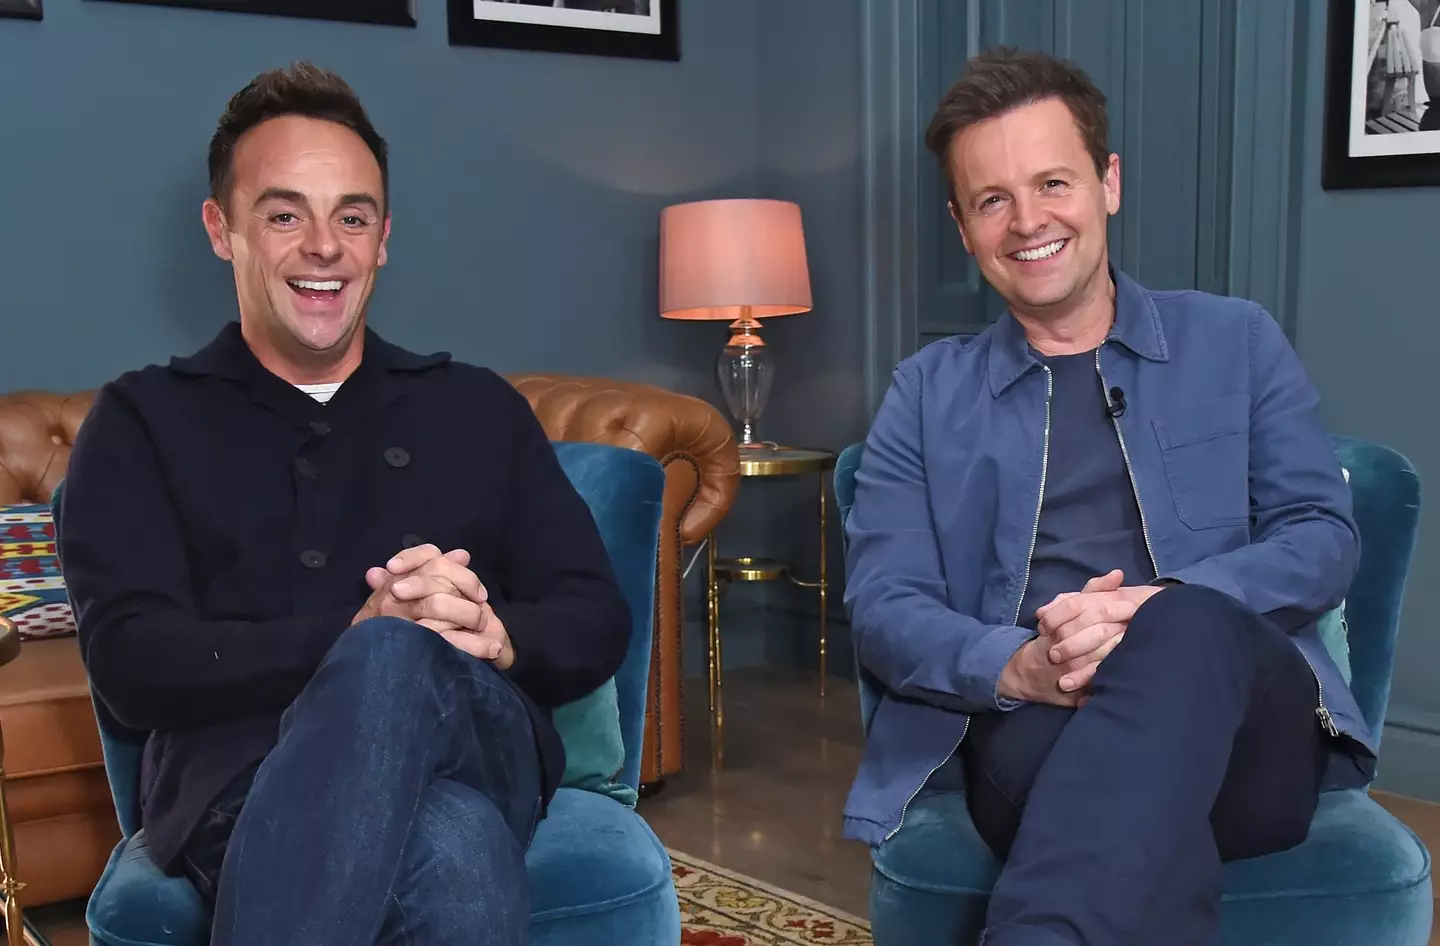 Ant & Dec have won the coveted award 21 times before.